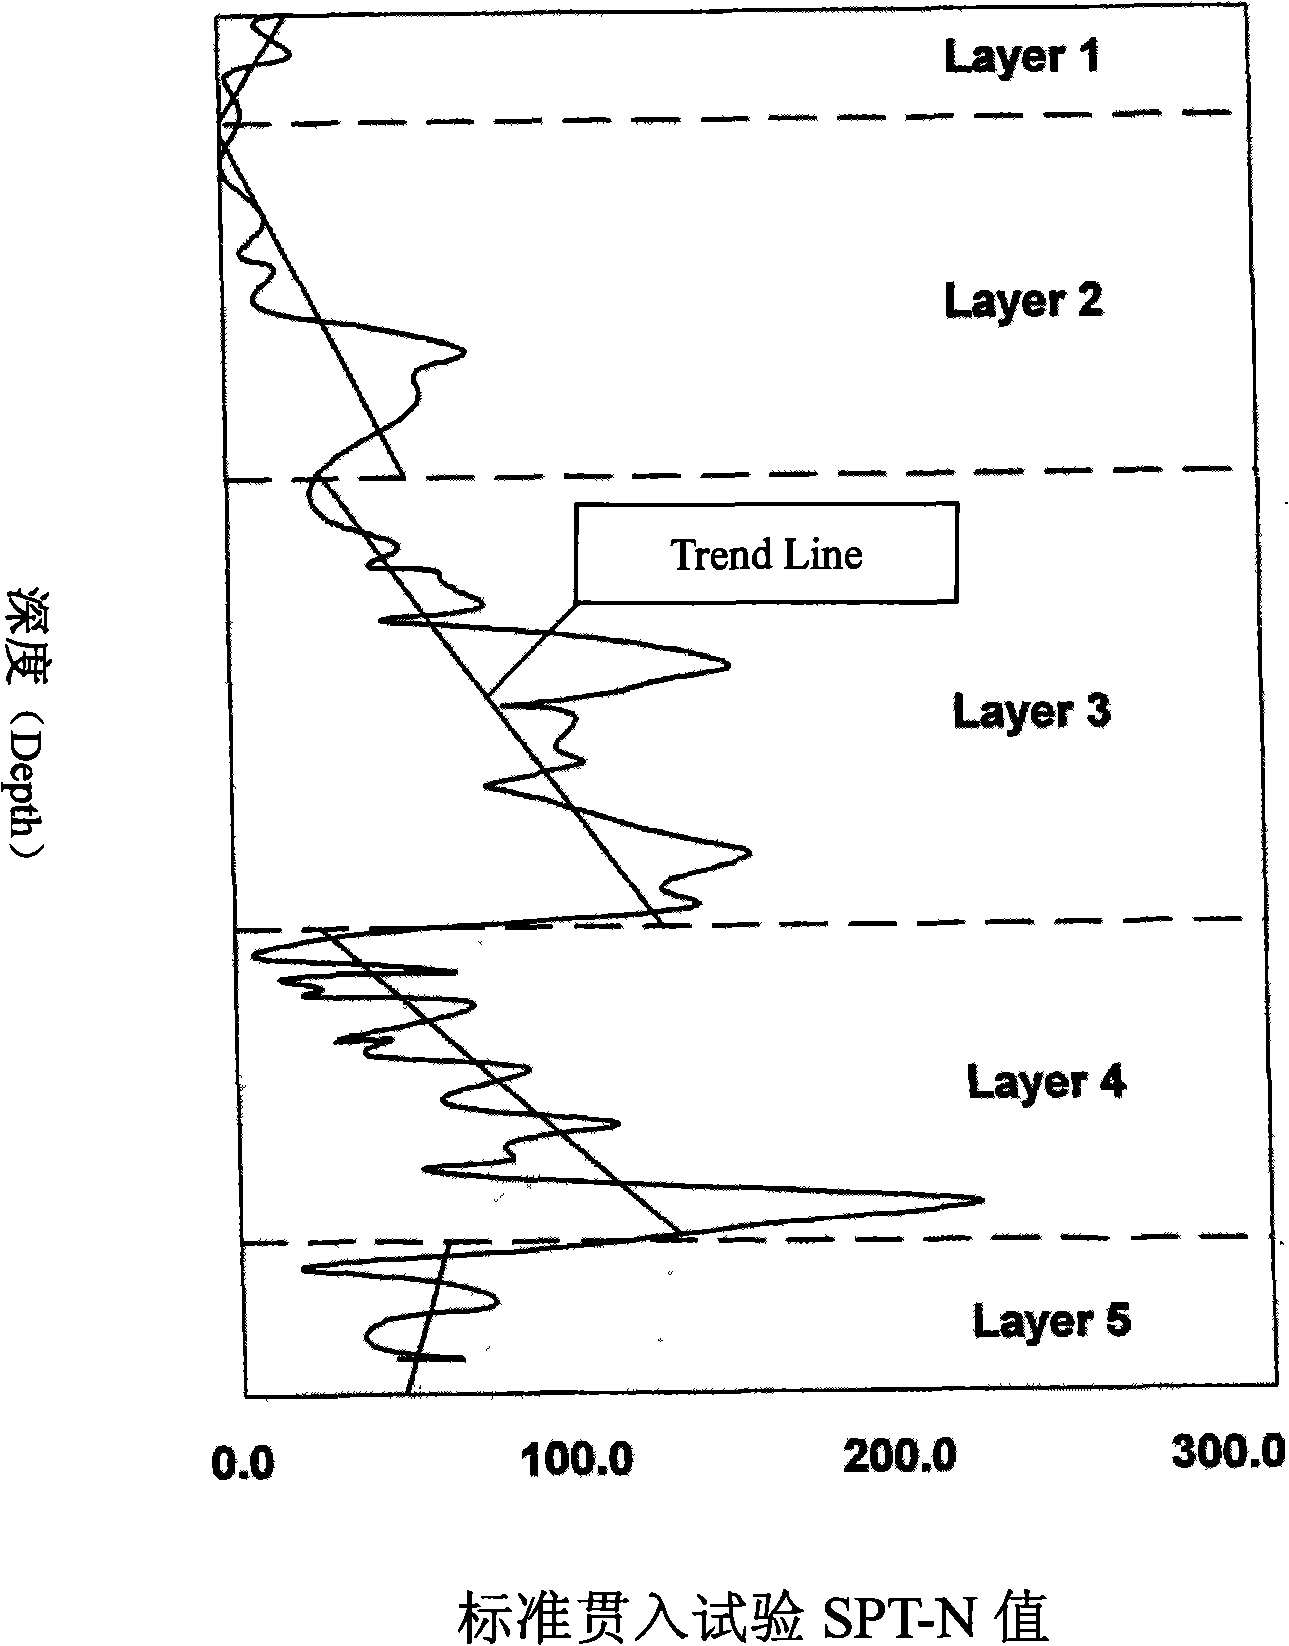 Technique and method for geotechnical engineering investigation and sampling based on soil variability